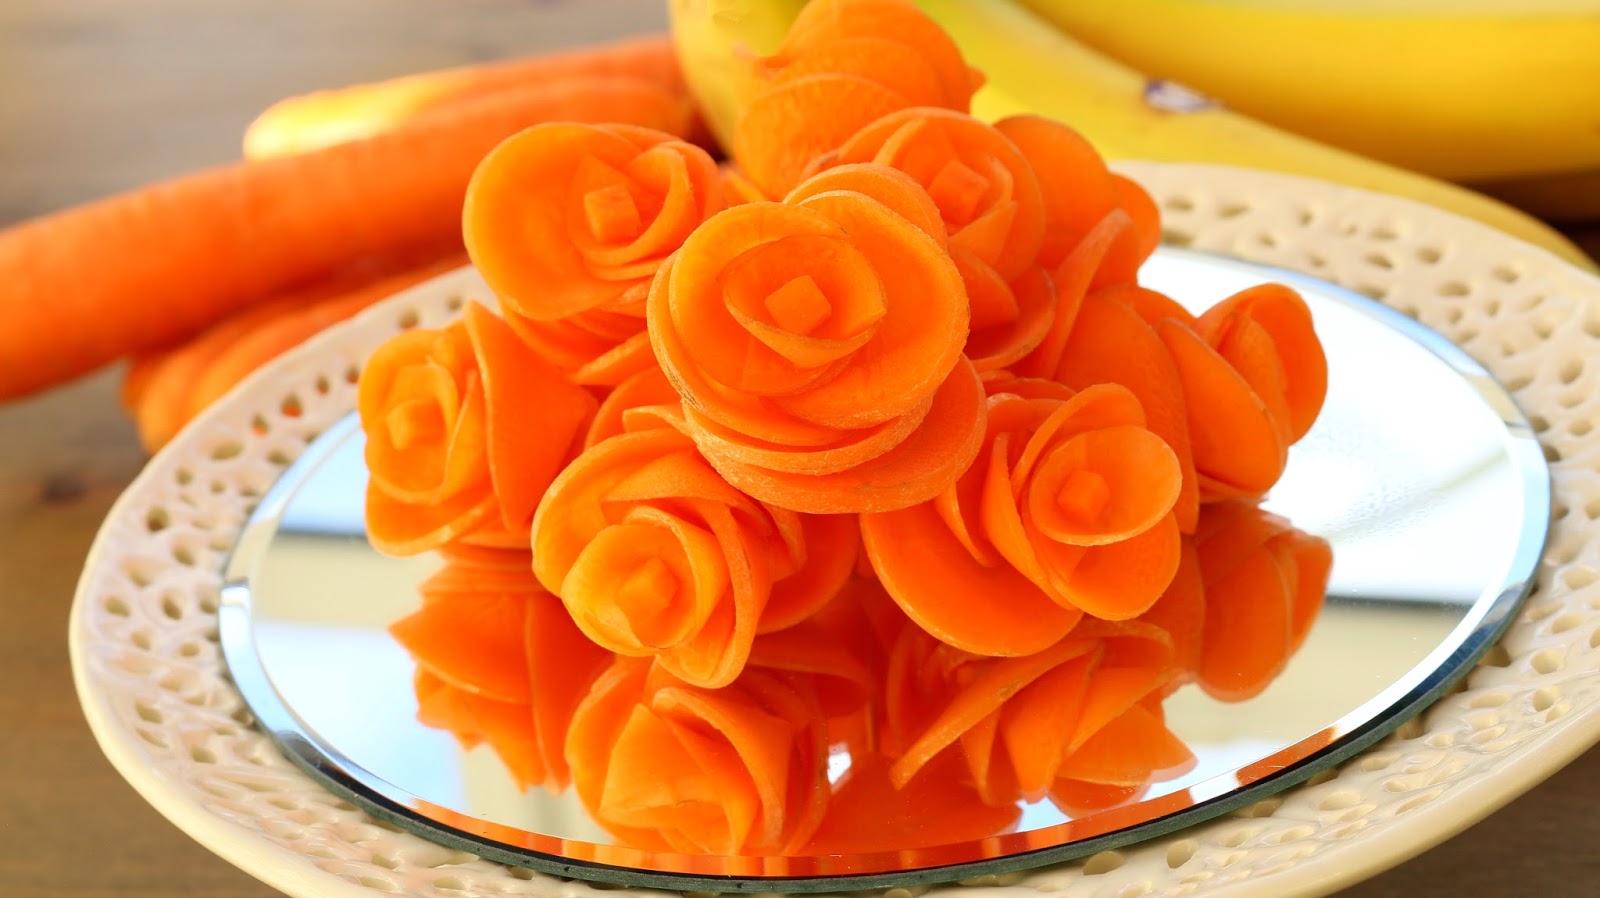 Josephine's Recipes: How to Make Carrot Flowers - Vegetable Carving Garnish - Sushi ...1600 x 898